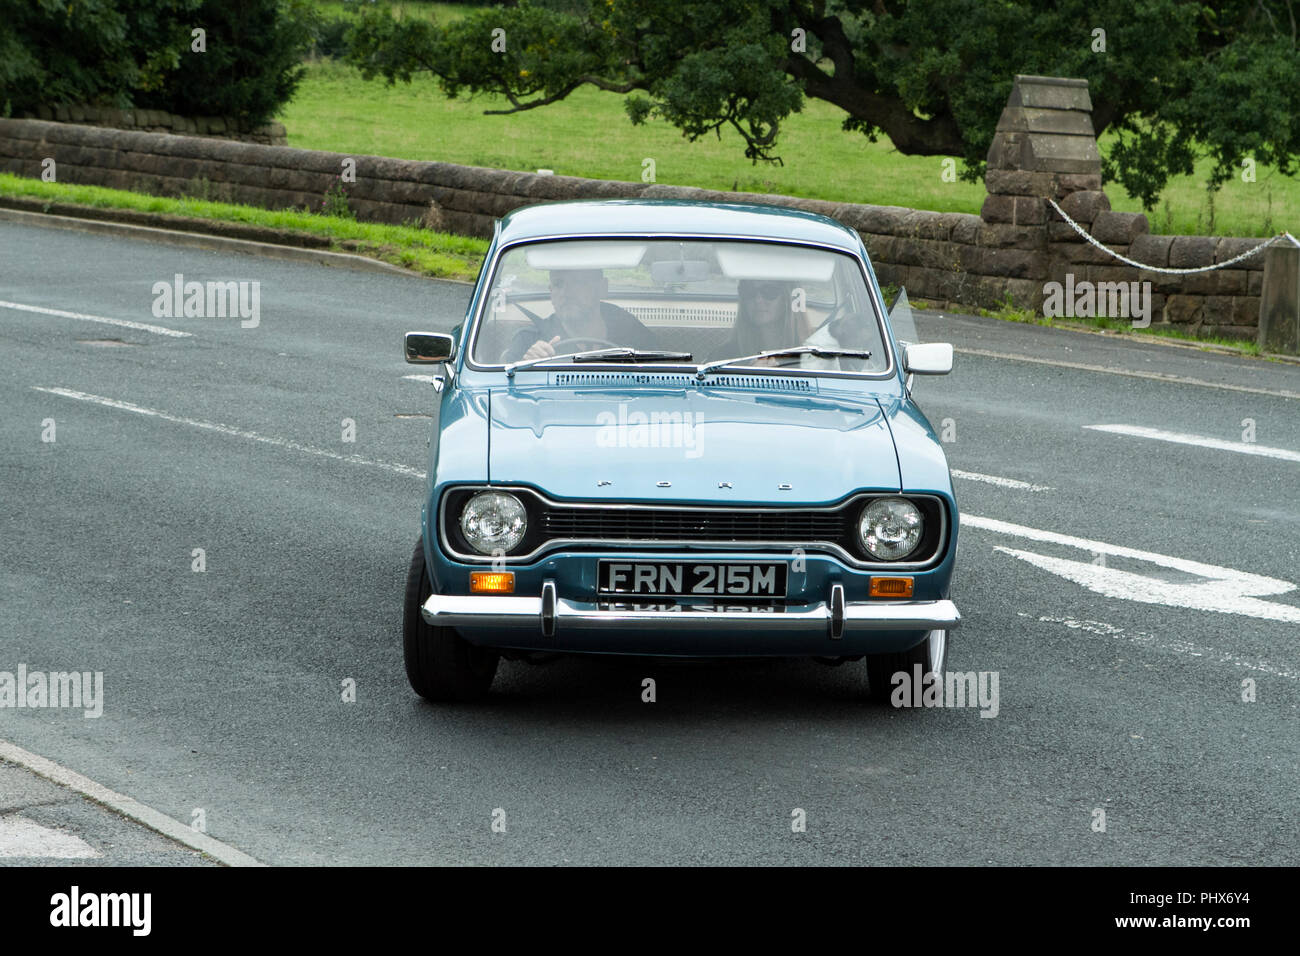 1973 Blue ERN215M Ford Escort at Hoghton towers annual classic vintage car rally, UK Stock Photo